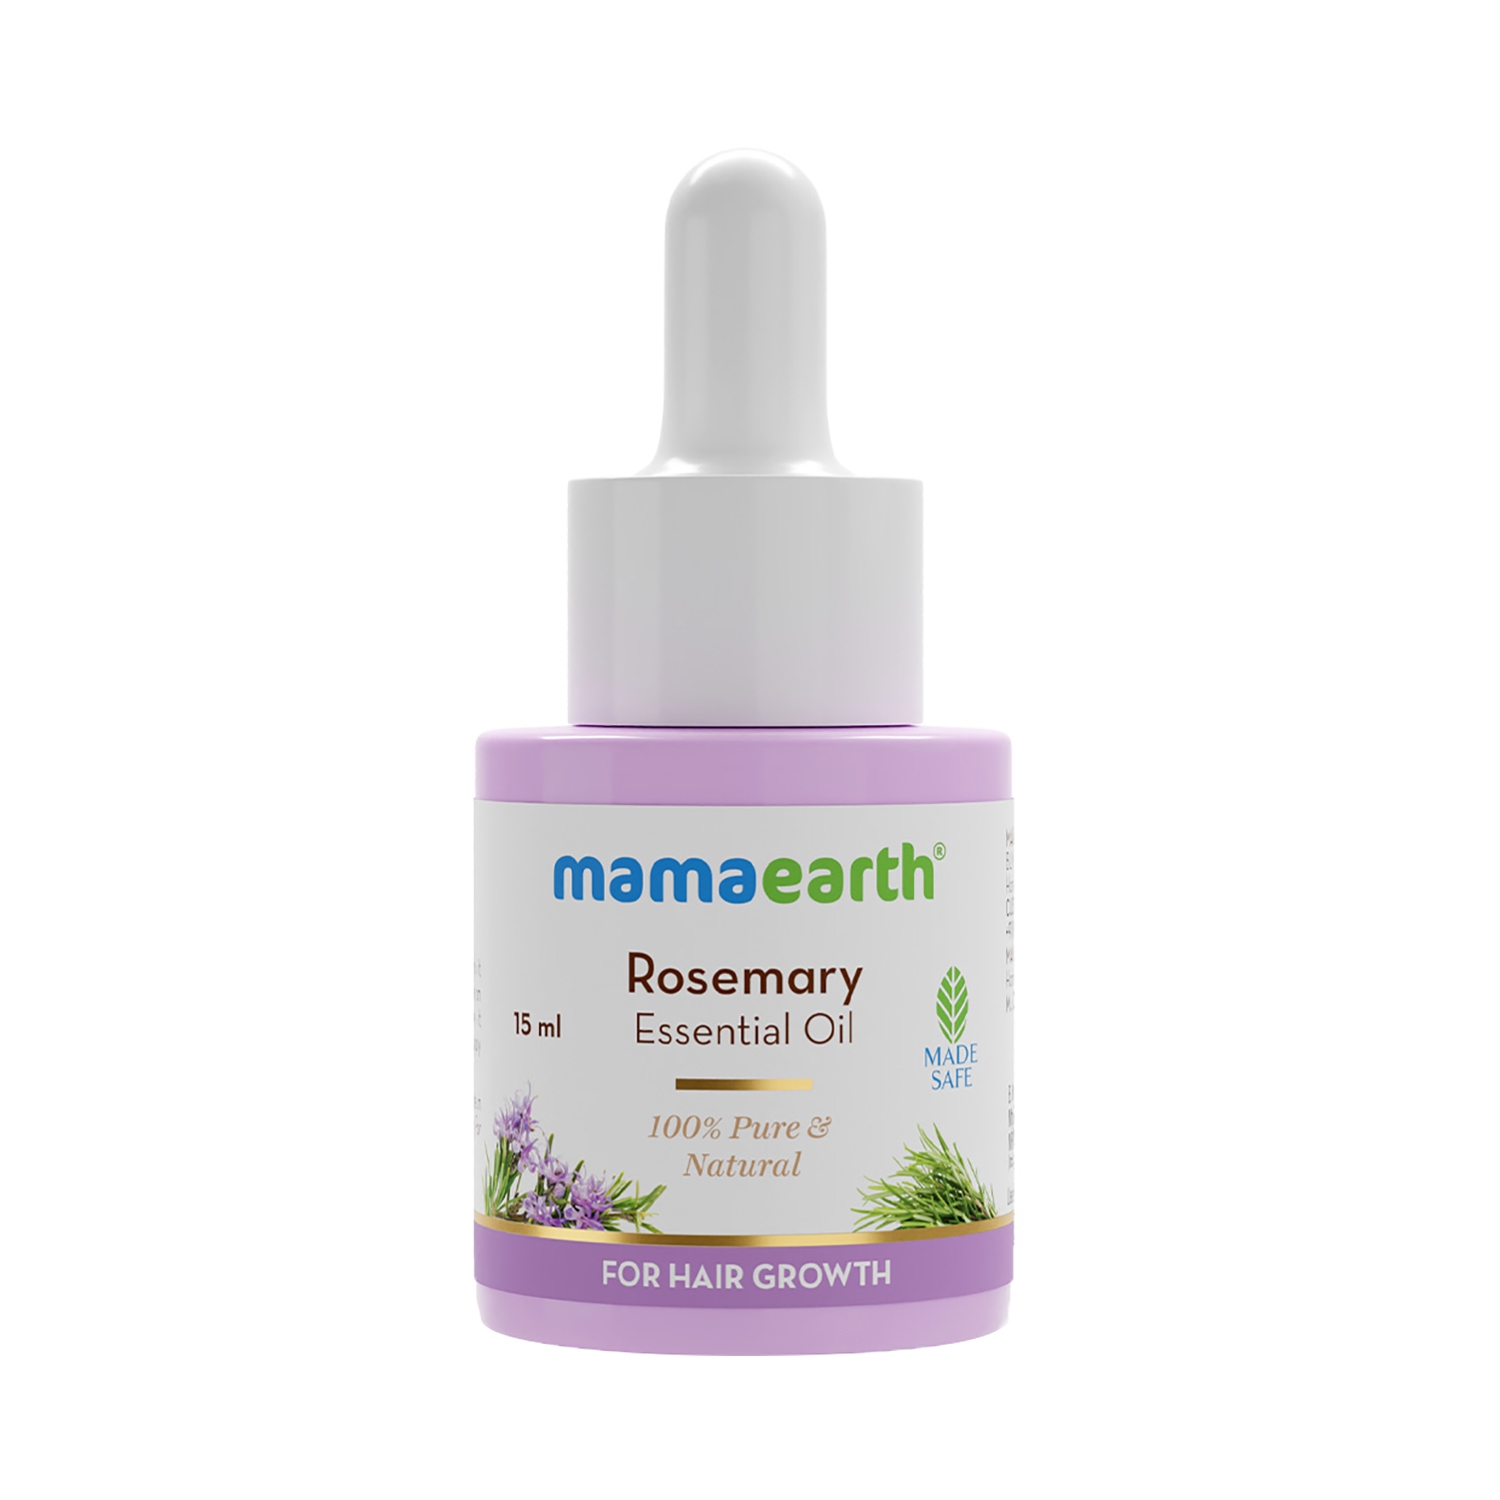 Mamaearth | Mamaearth Rosemary Essential Oil For Hair Growth (15ml)